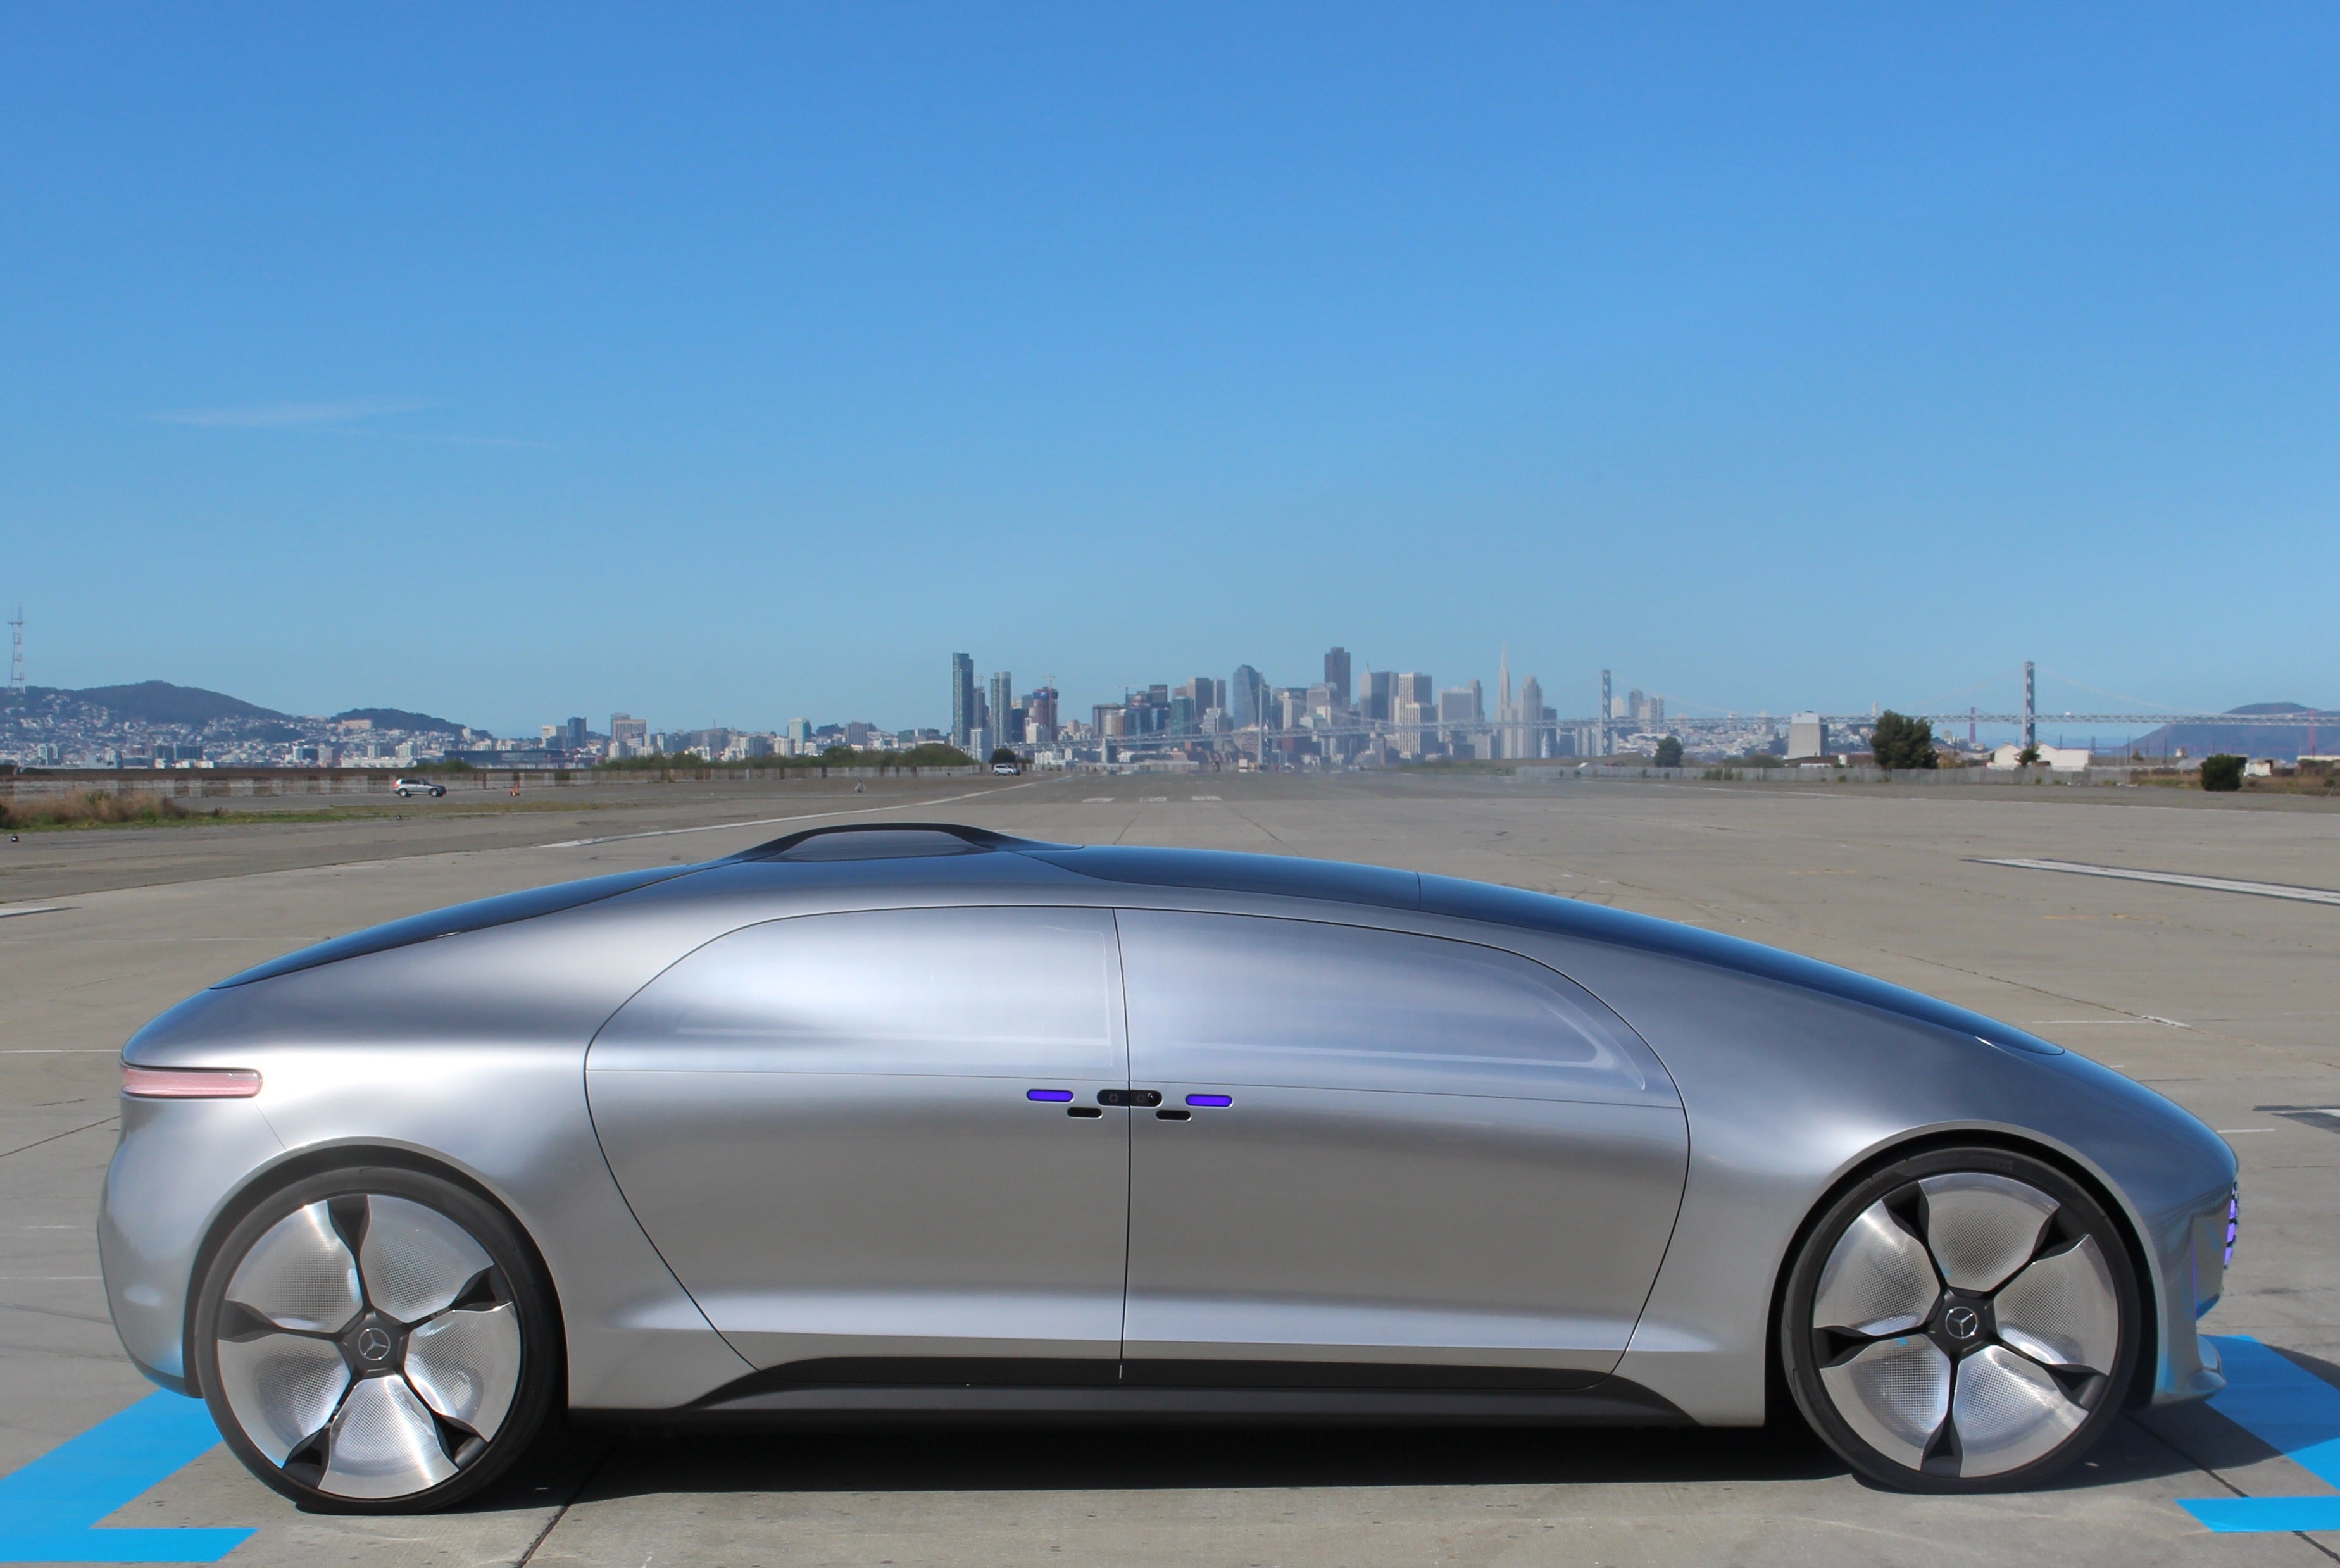 Riding In The Mercedes Benz F 015 Concept Car The Self Driving Lounge Of The Future Pcworld